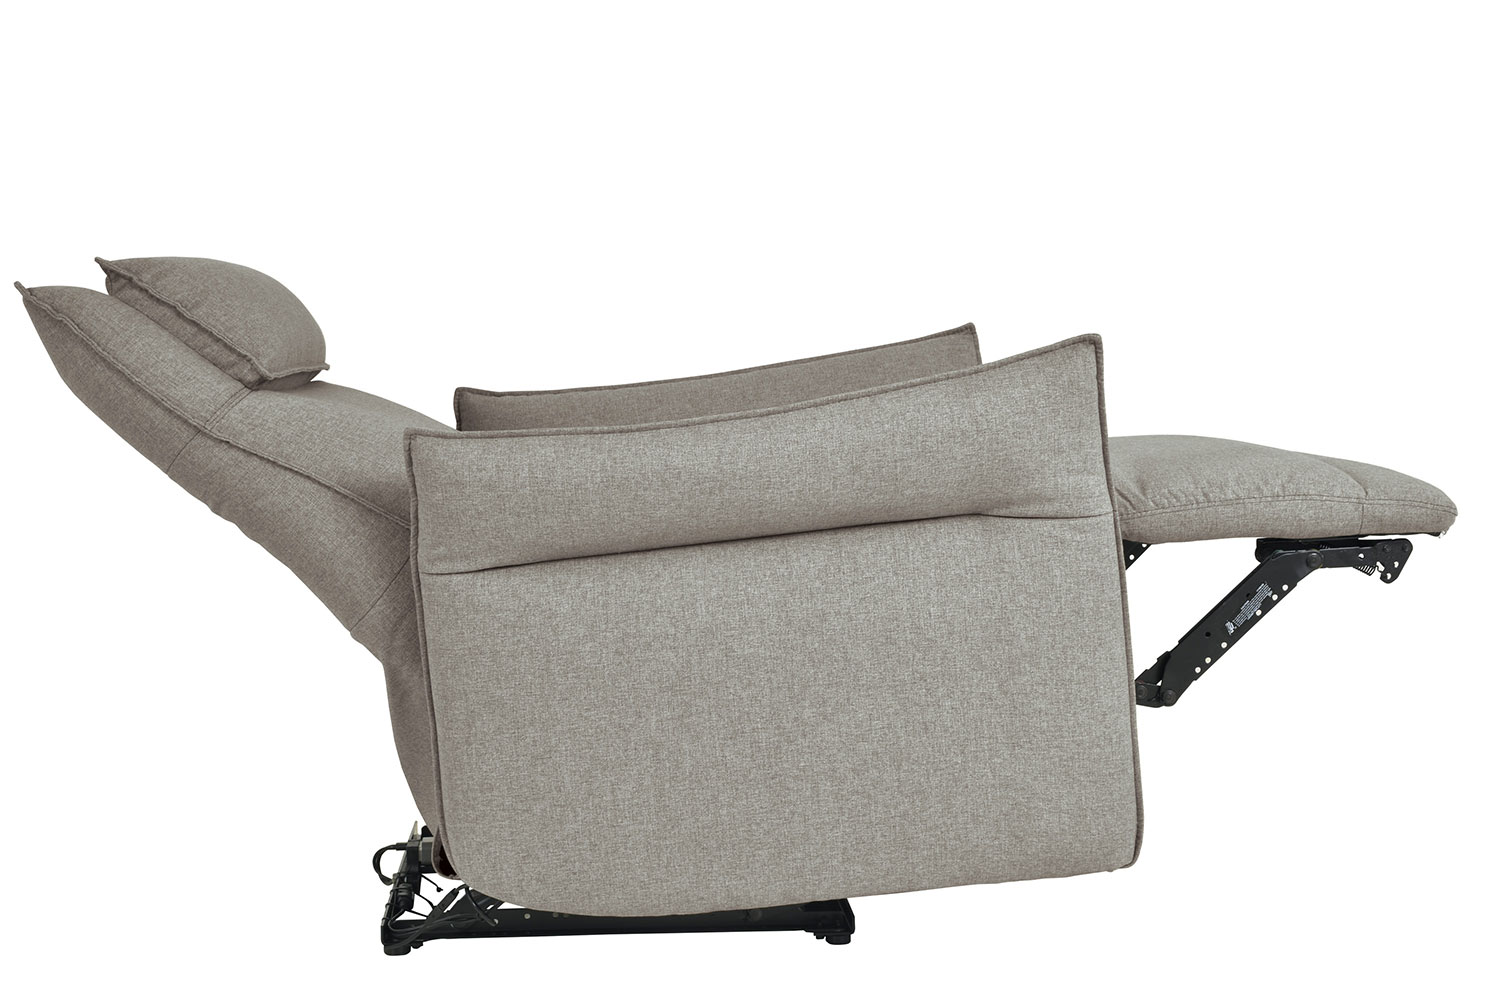 Homelegance Linette Power Reclining Chair with Power Headrest - Taupe